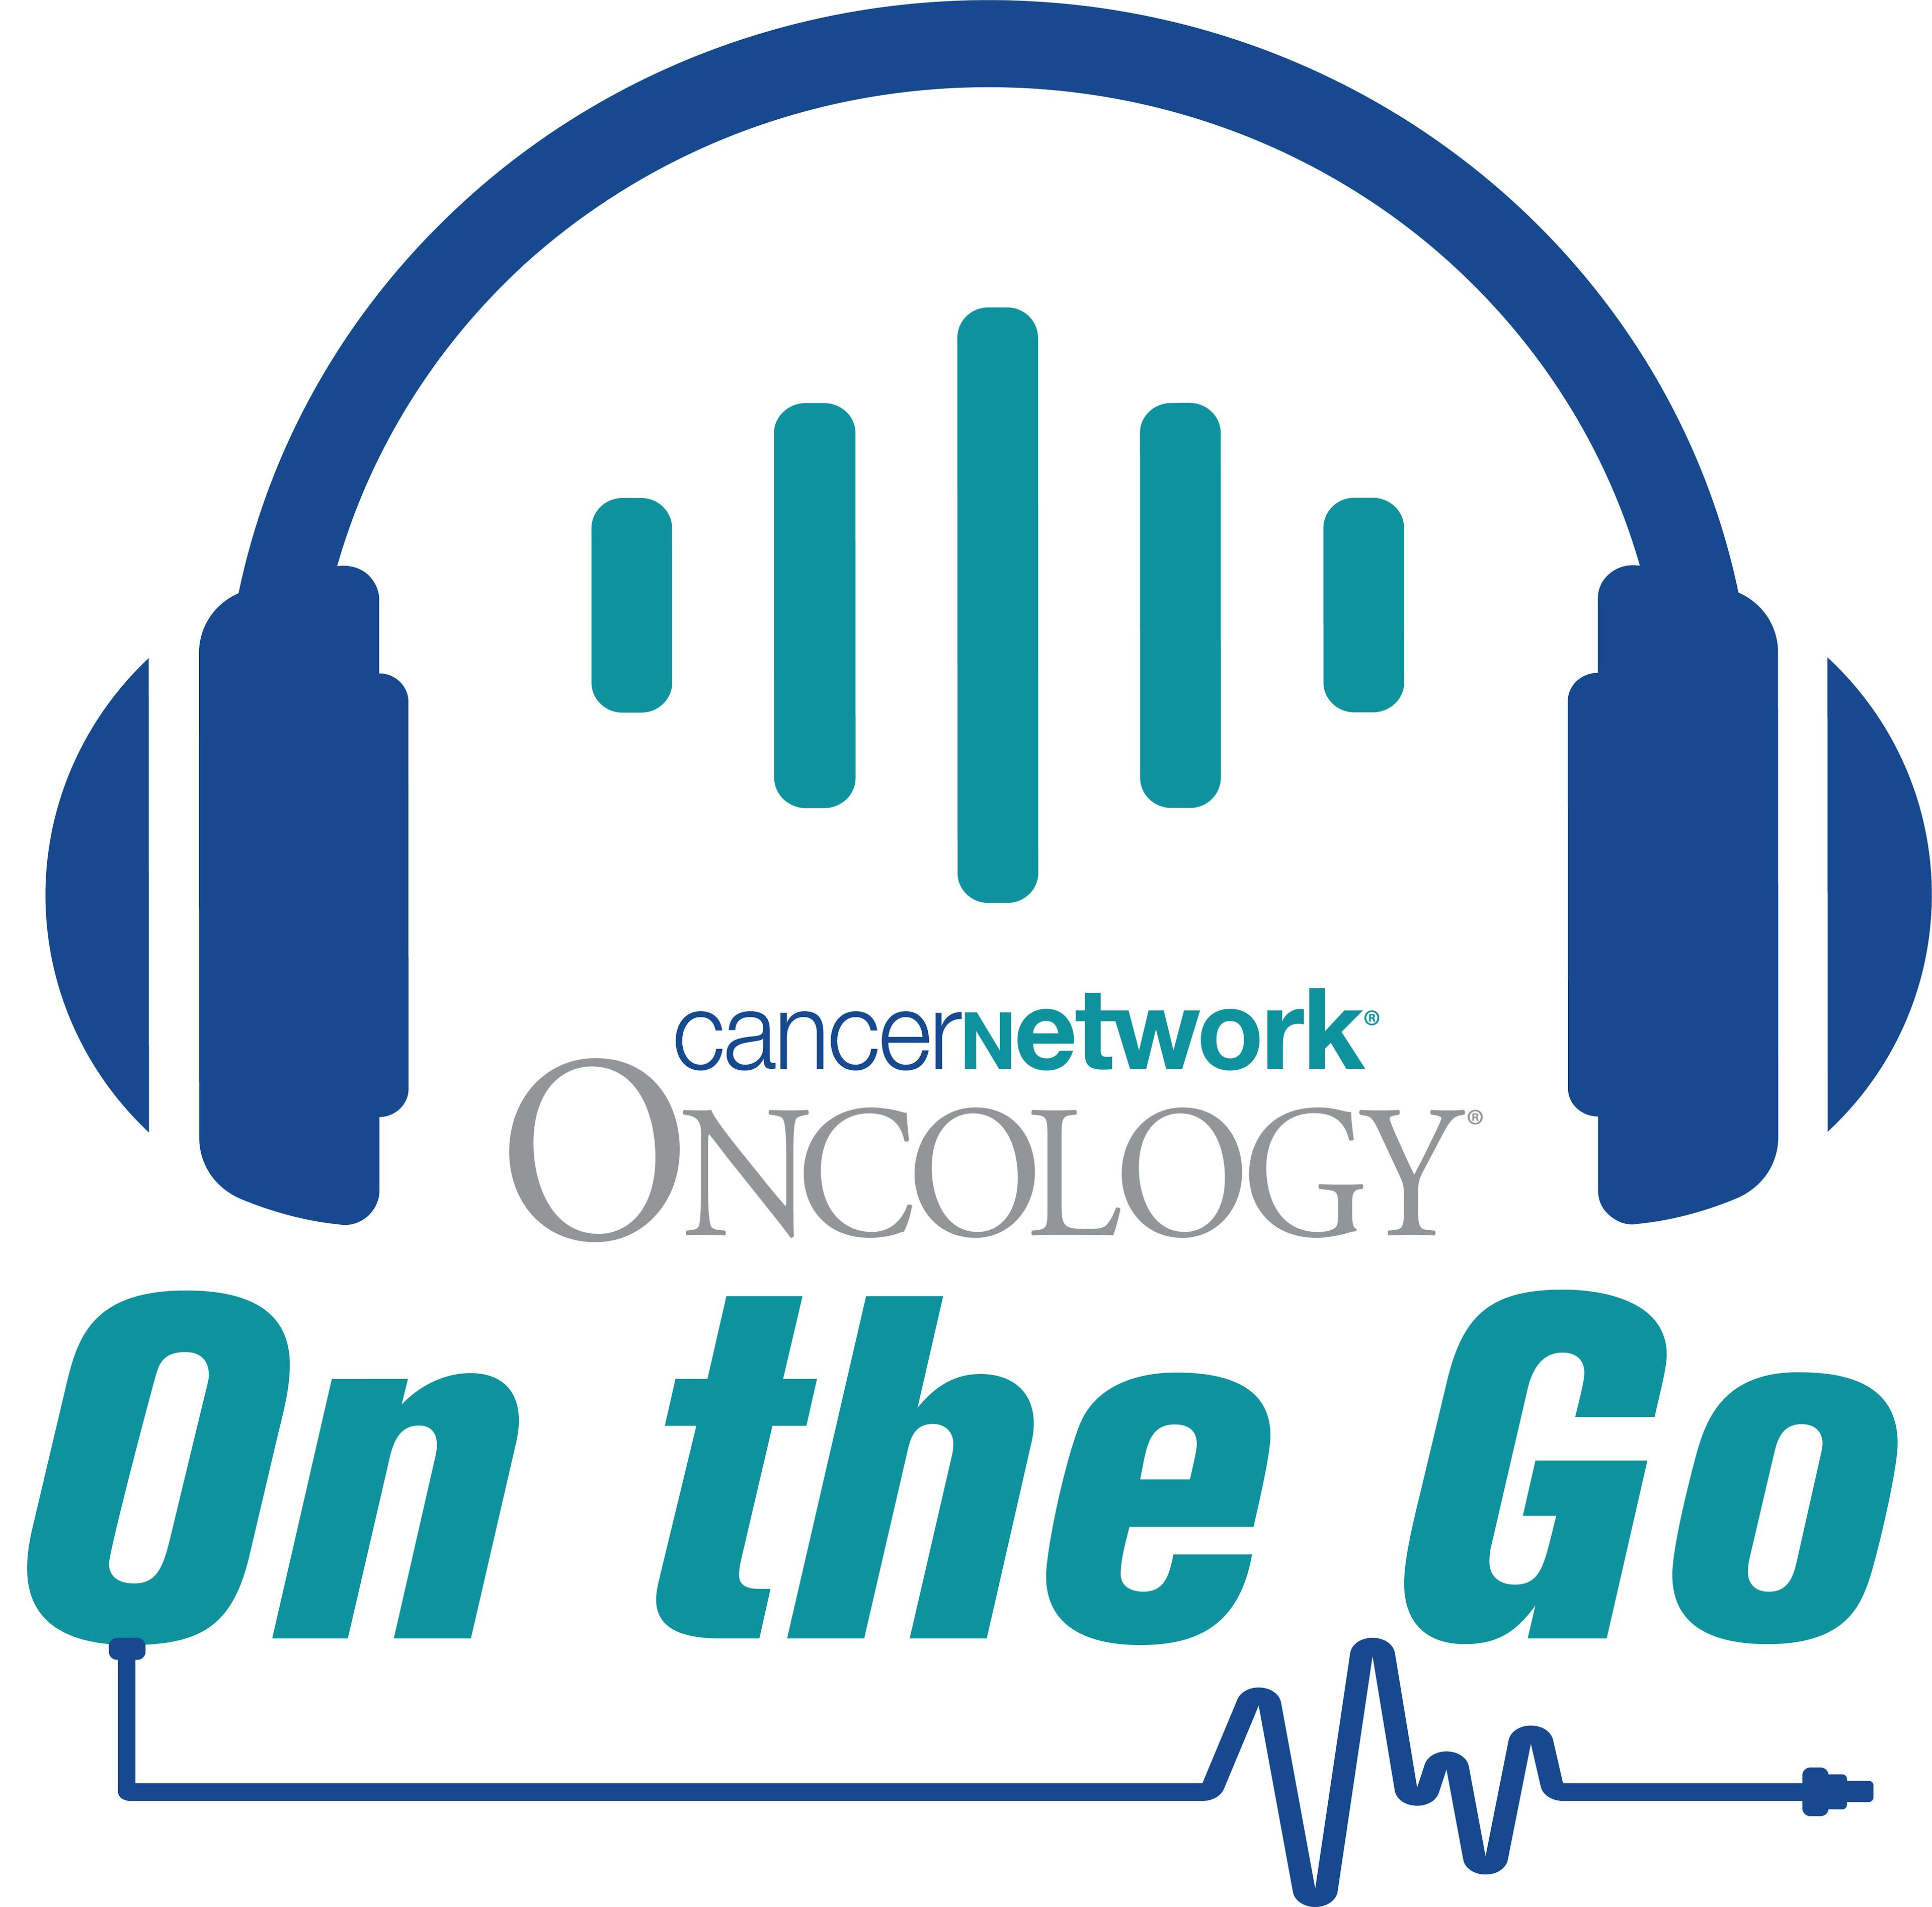 Santosh Rao, MD, discusses the formation of new guidelines informing the use of integrative oncology for patients with kidney cancer from the Society for Integrative Oncology.